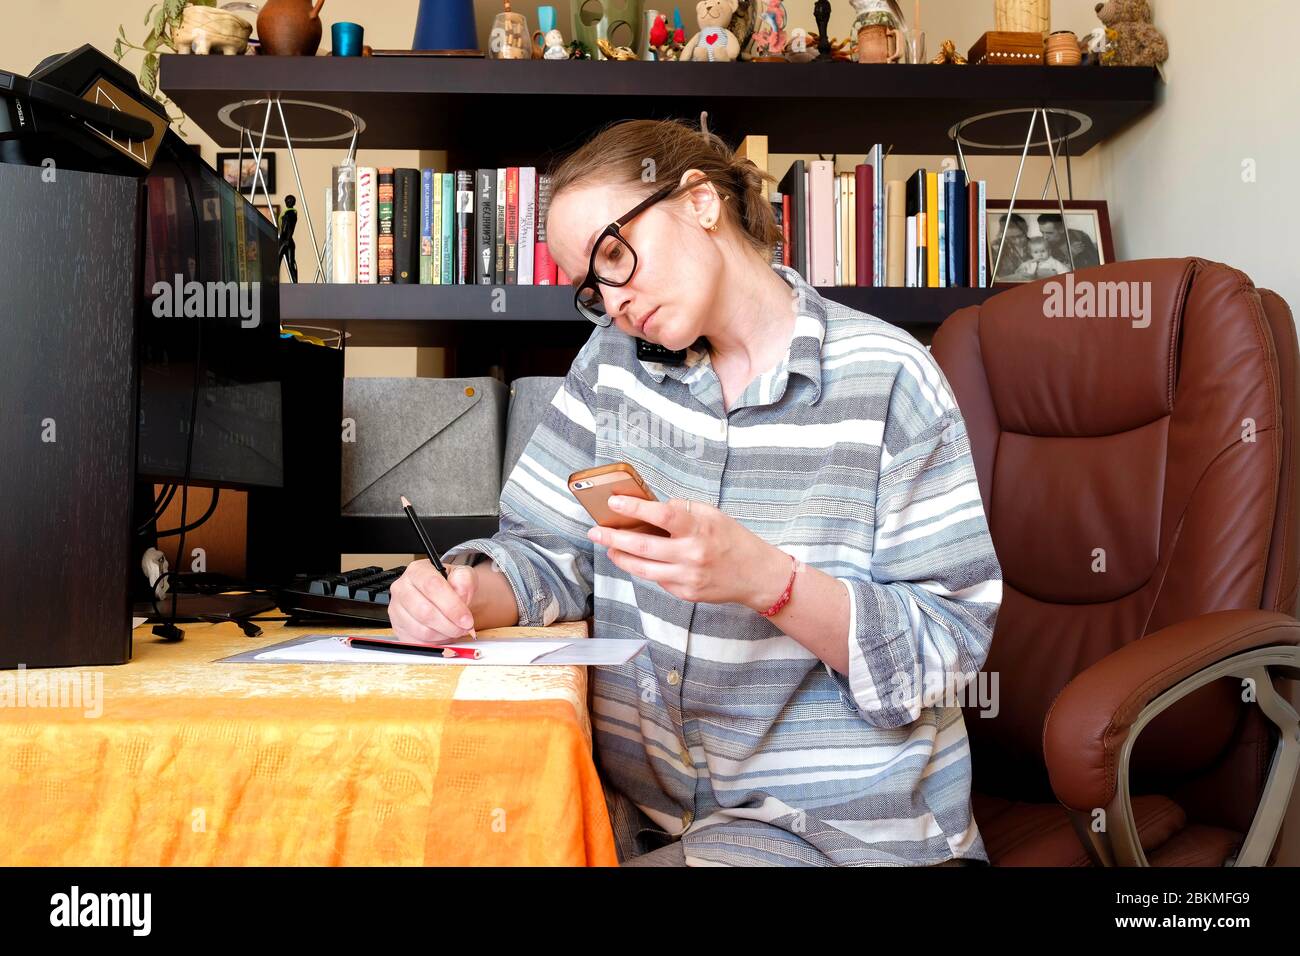 A woman works at home. Talks on the phone, records. Cozy atmosphere, home clothes. Stock Photo